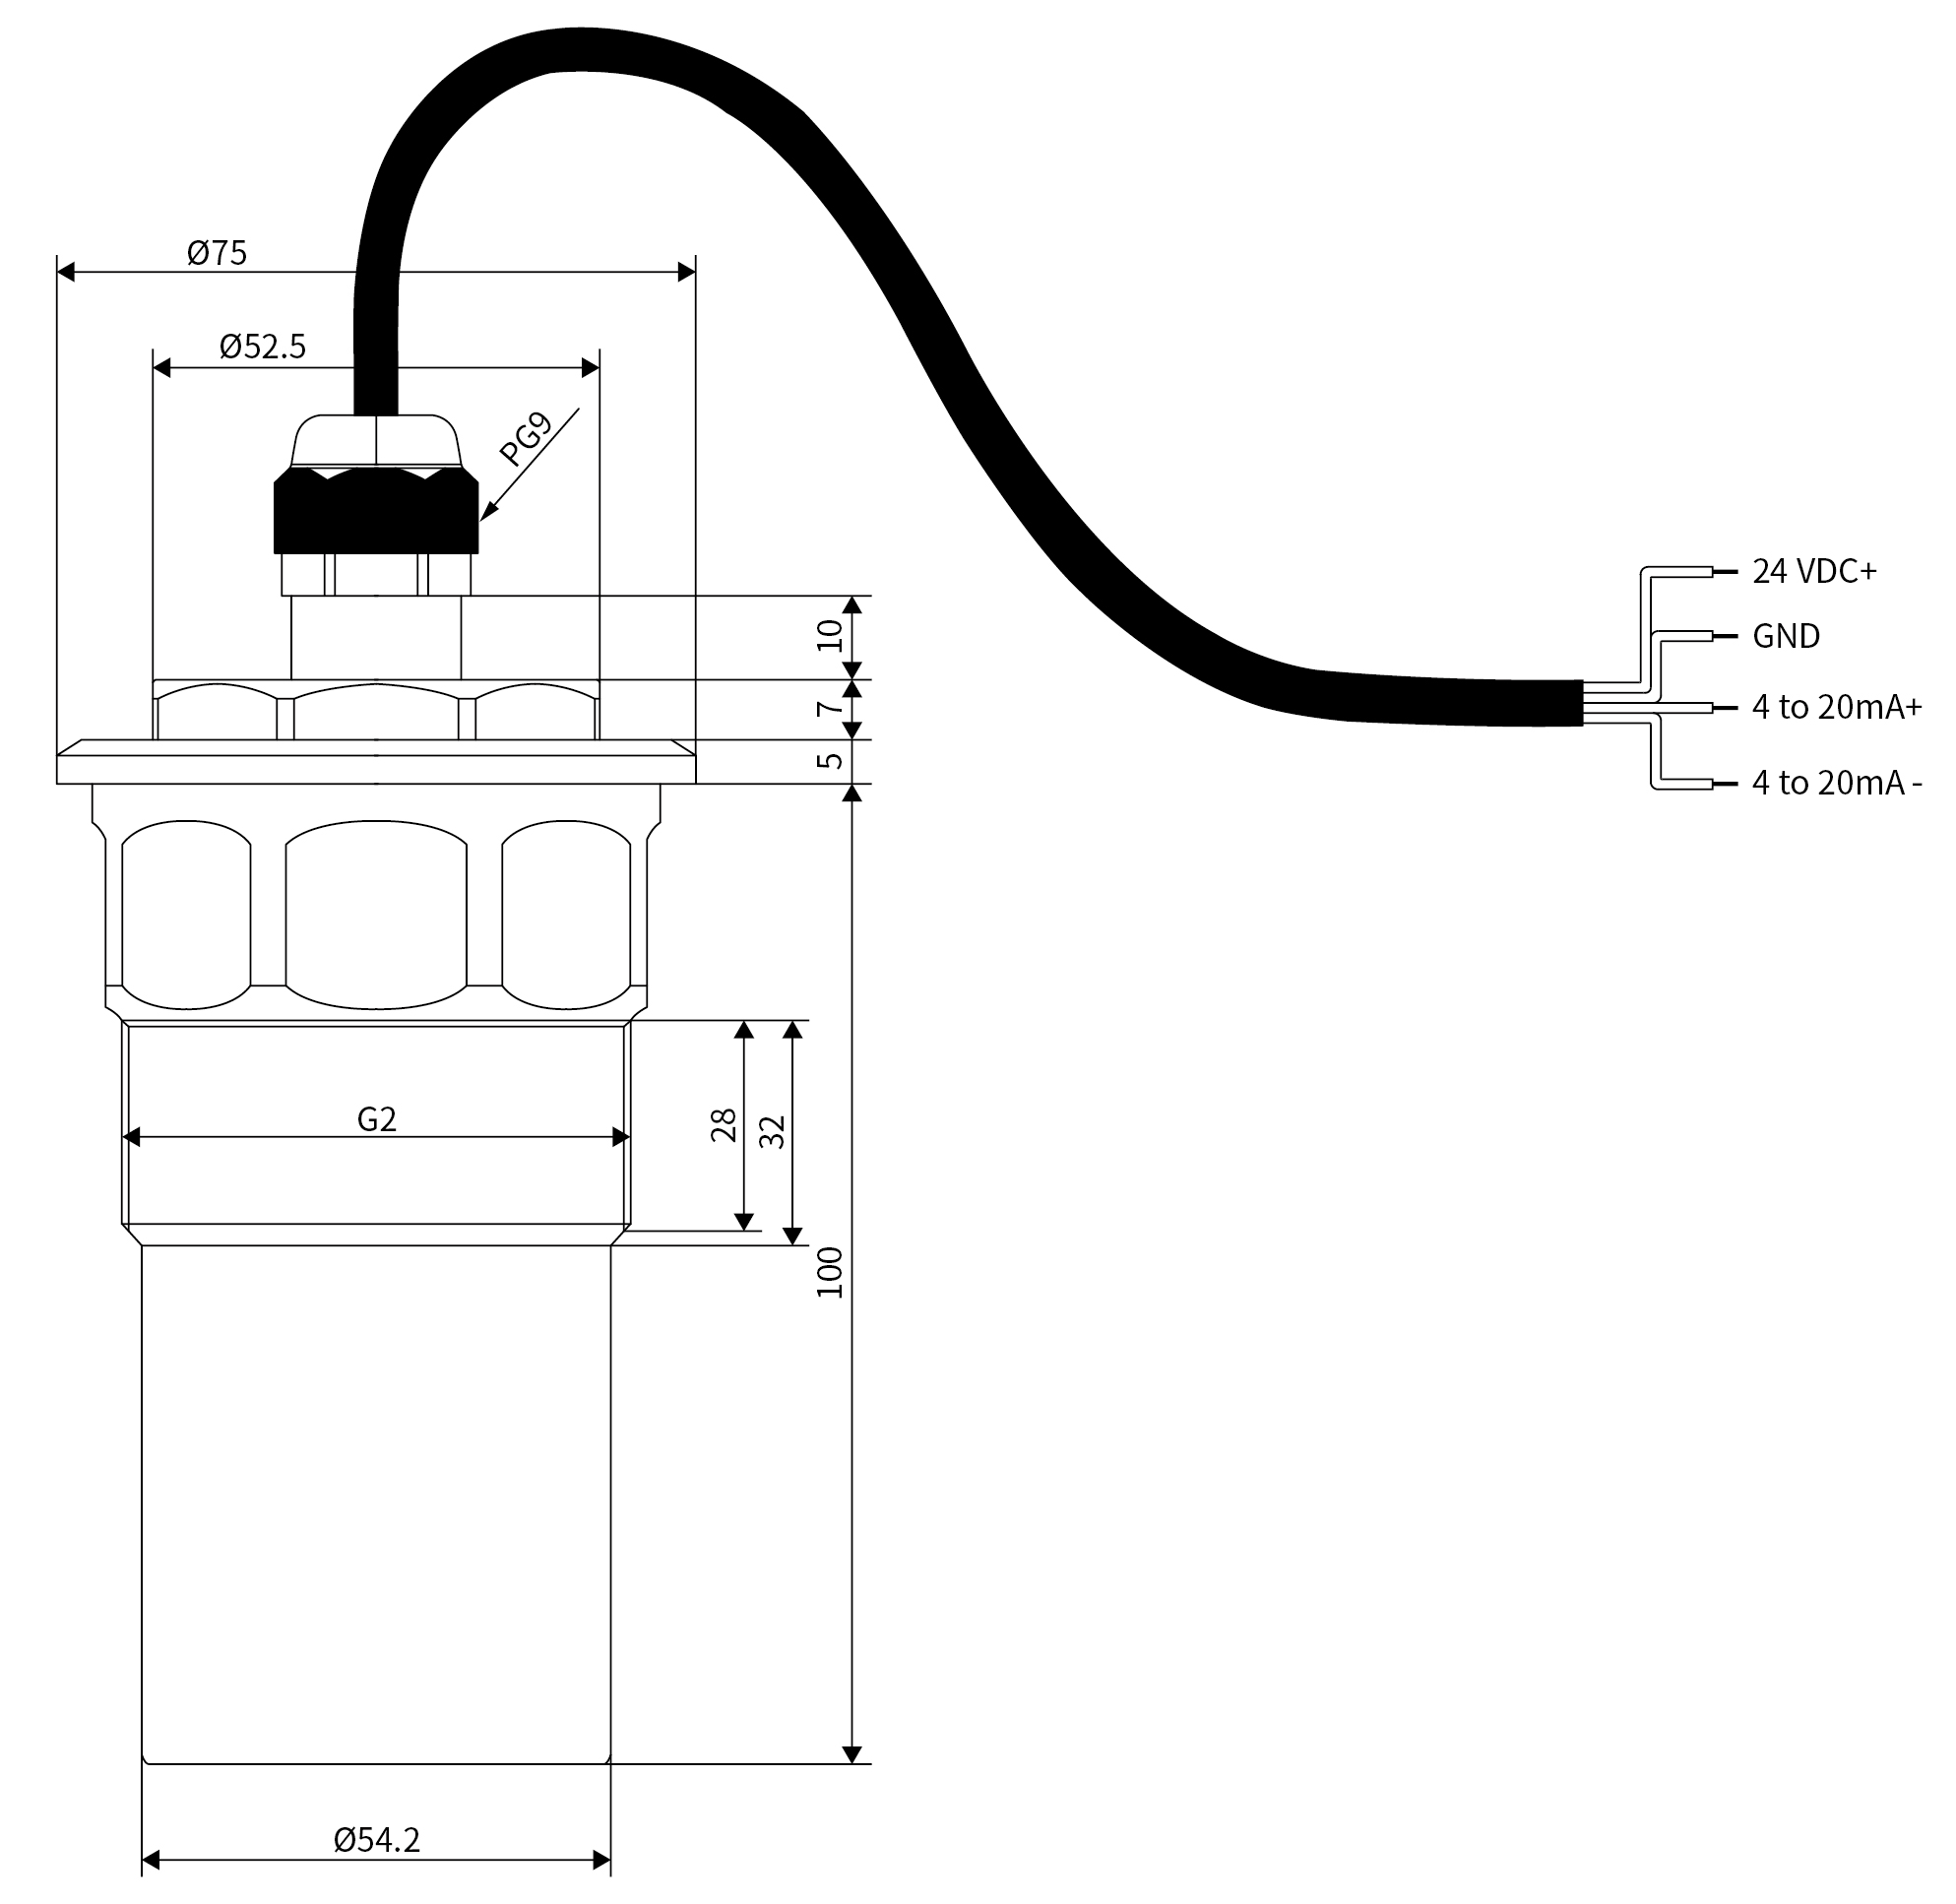 ultrasonic-liquid-level-transmitter-dimensions-and-wiring-diagram